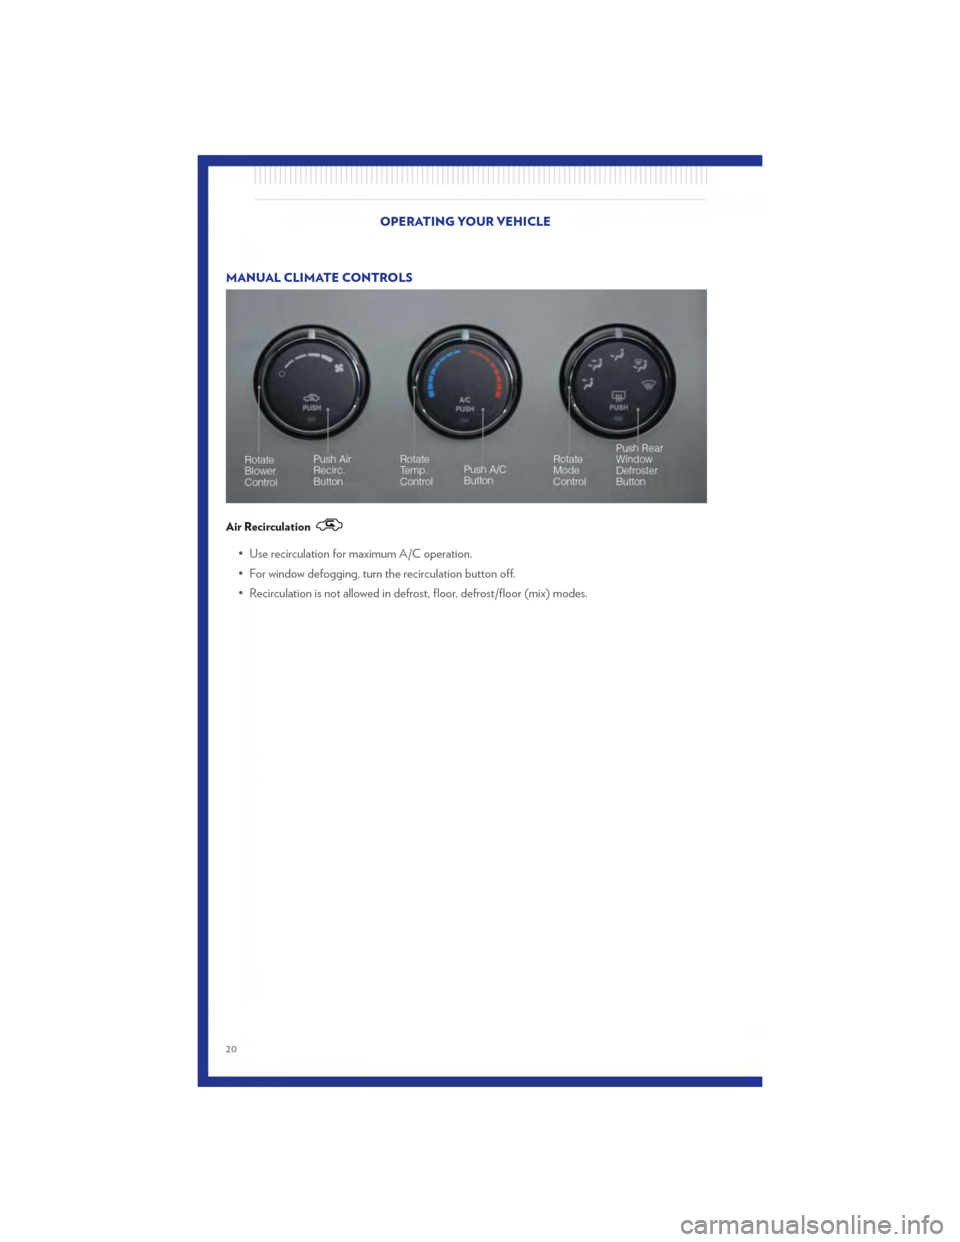 CHRYSLER 200 2011 1.G Owners Manual MANUAL CLIMATE CONTROLS
Air Recirculation
• Use recirculation for maximum A/C operation.
• For window defogging, turn the recirculation button off.
• Recirculation is not allowed in defrost, flo